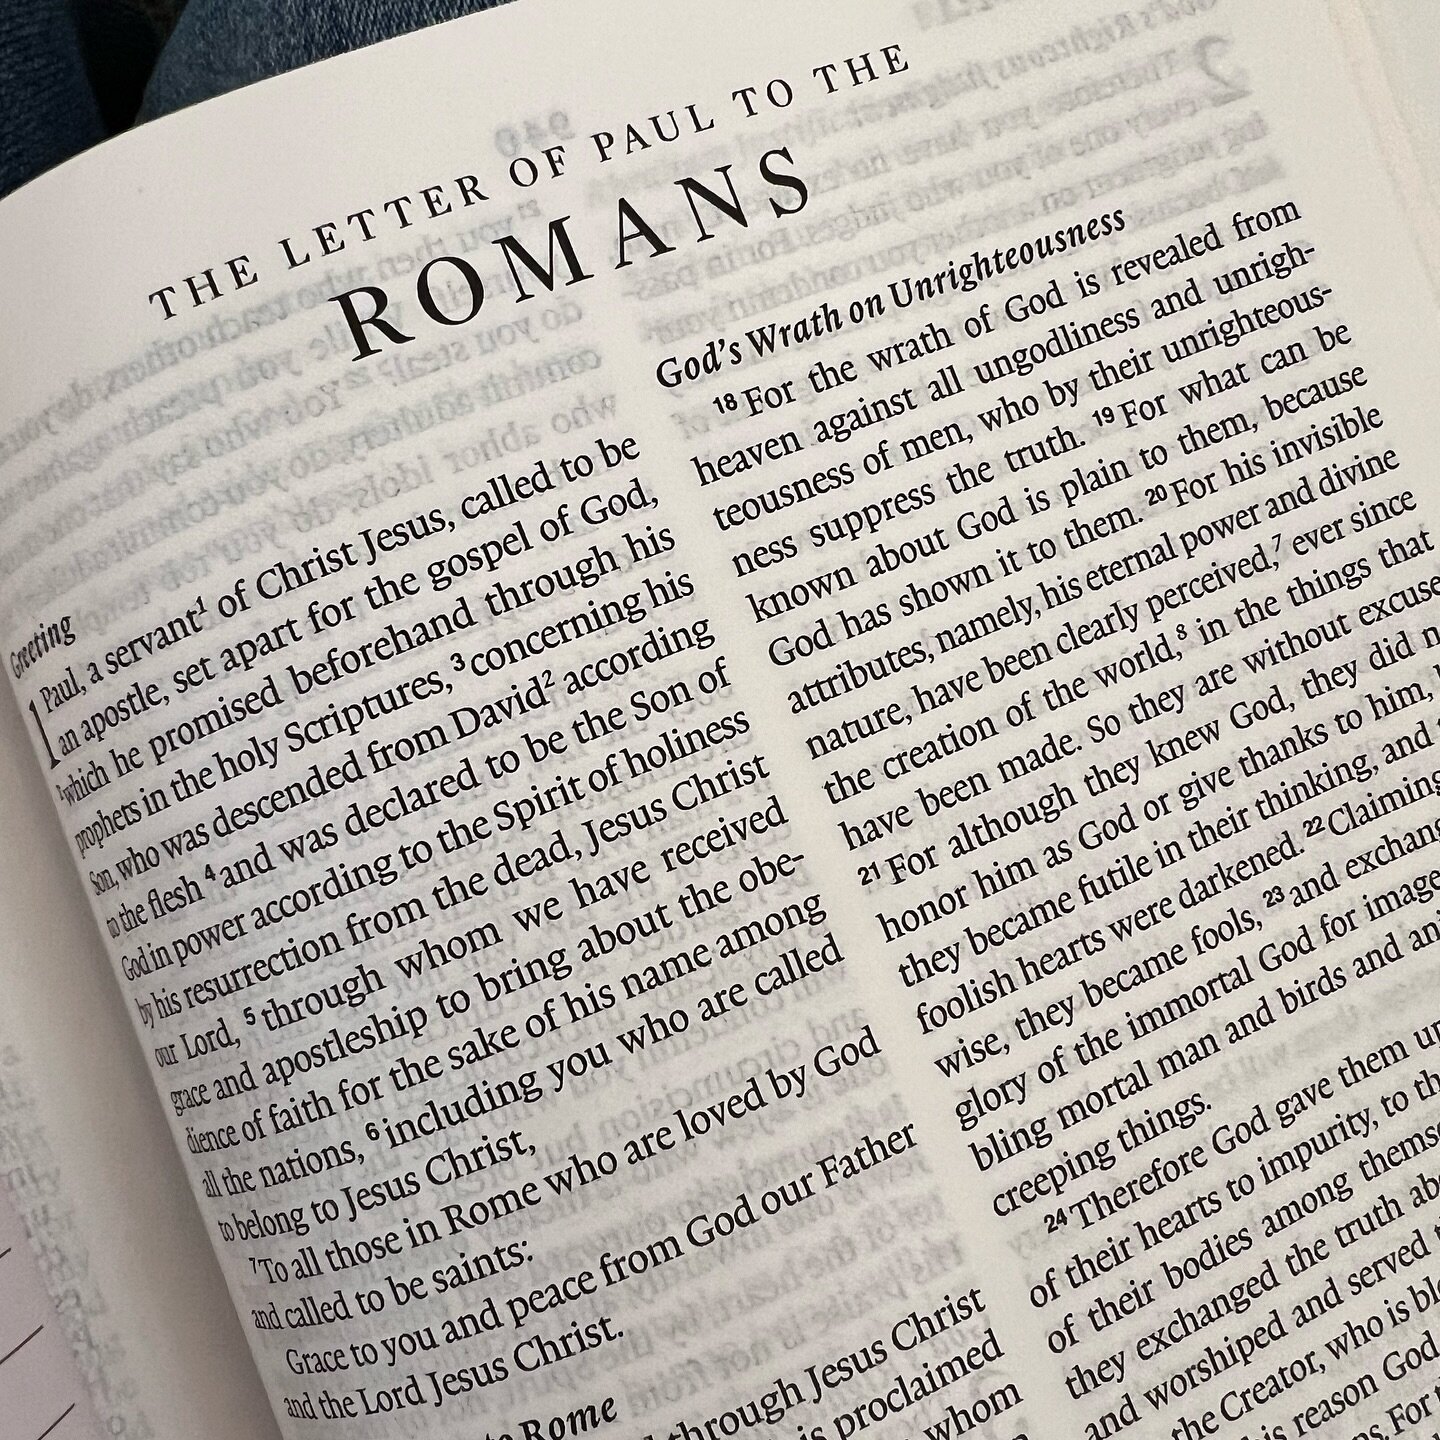 Welcome back, Ladies! Janet guided us through the first part of Romans and led us in a beautiful exercise on applying God&rsquo;s Word as a love letter.💌

We also wanted to remind you to give yourself a few extra minutes to arrive ontime as the cons